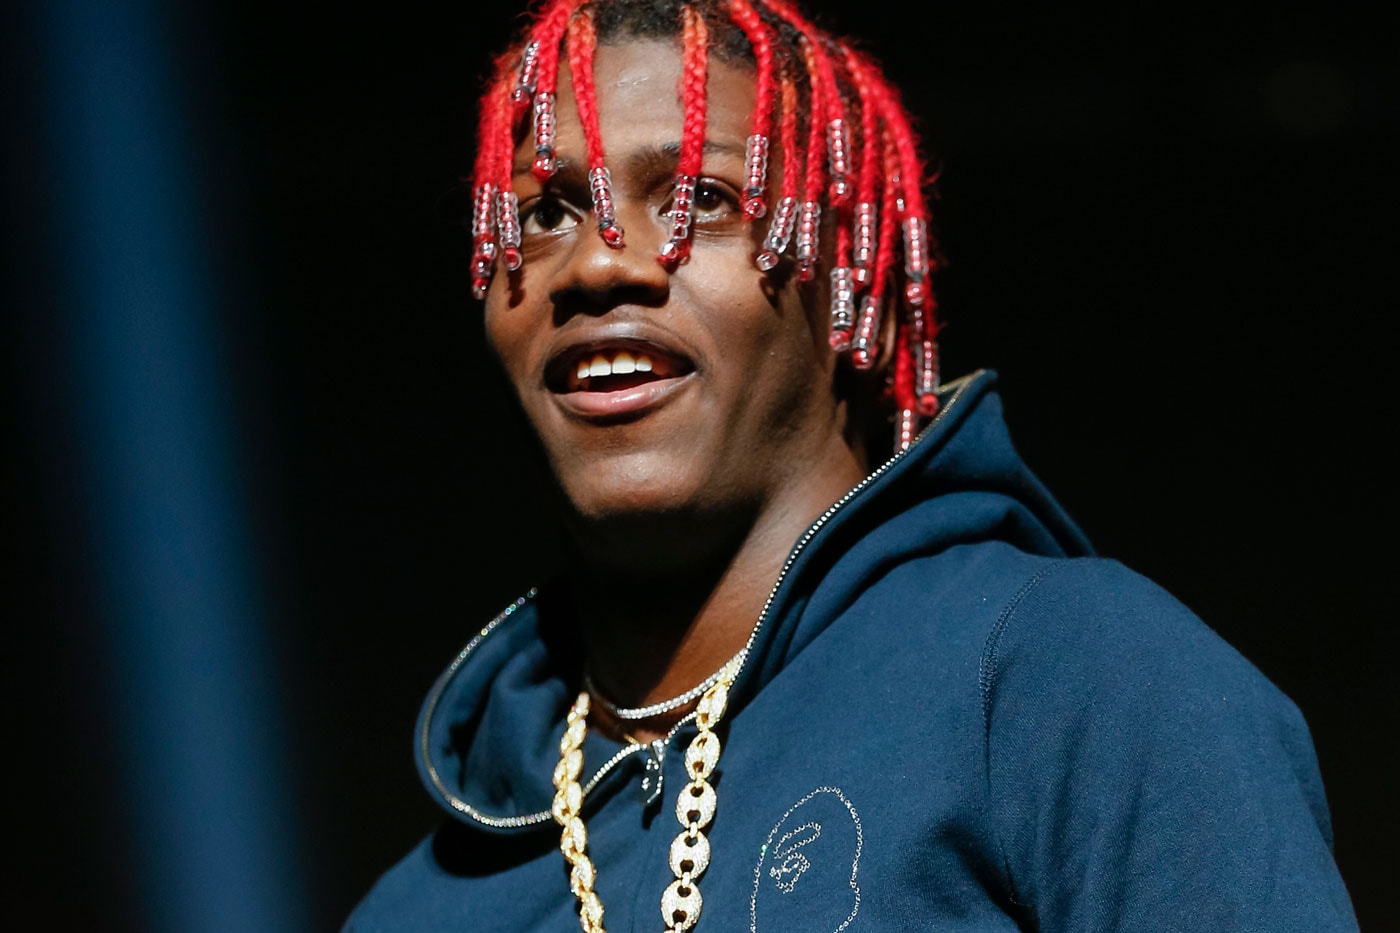 Lil Yachty’s Dad Talks About His Son's Music & Influences Growing Up